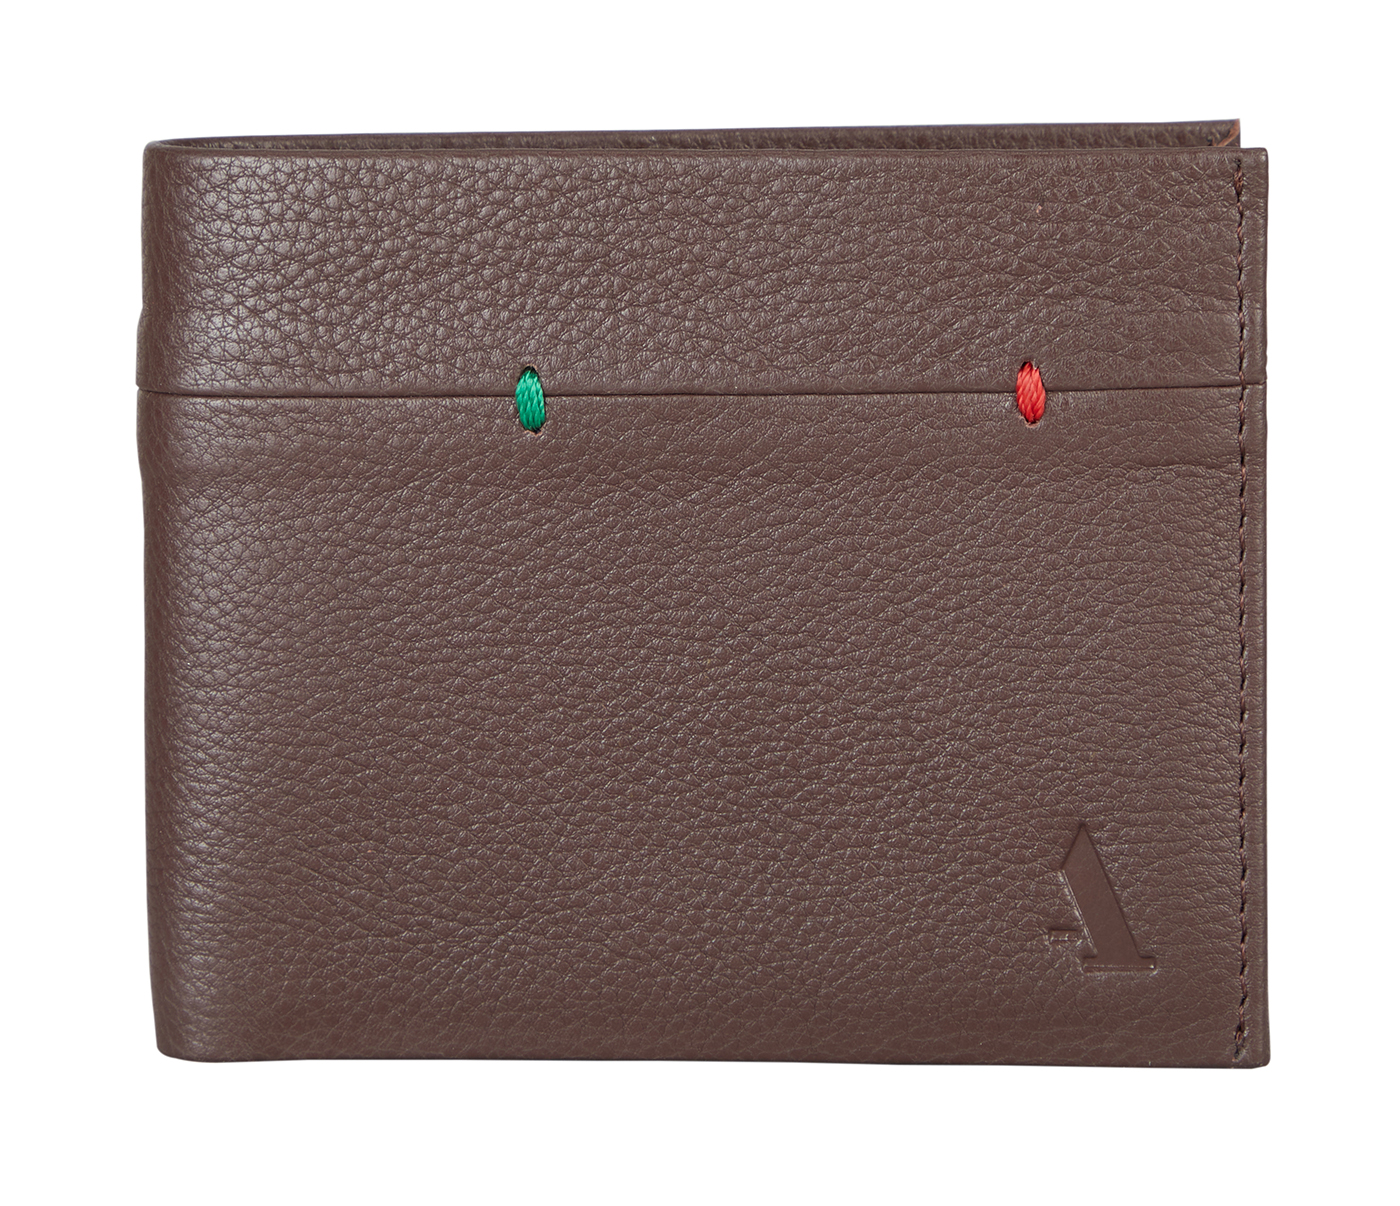 dunhill Men's Wallets & Leather Goods | dunhill US Online Store